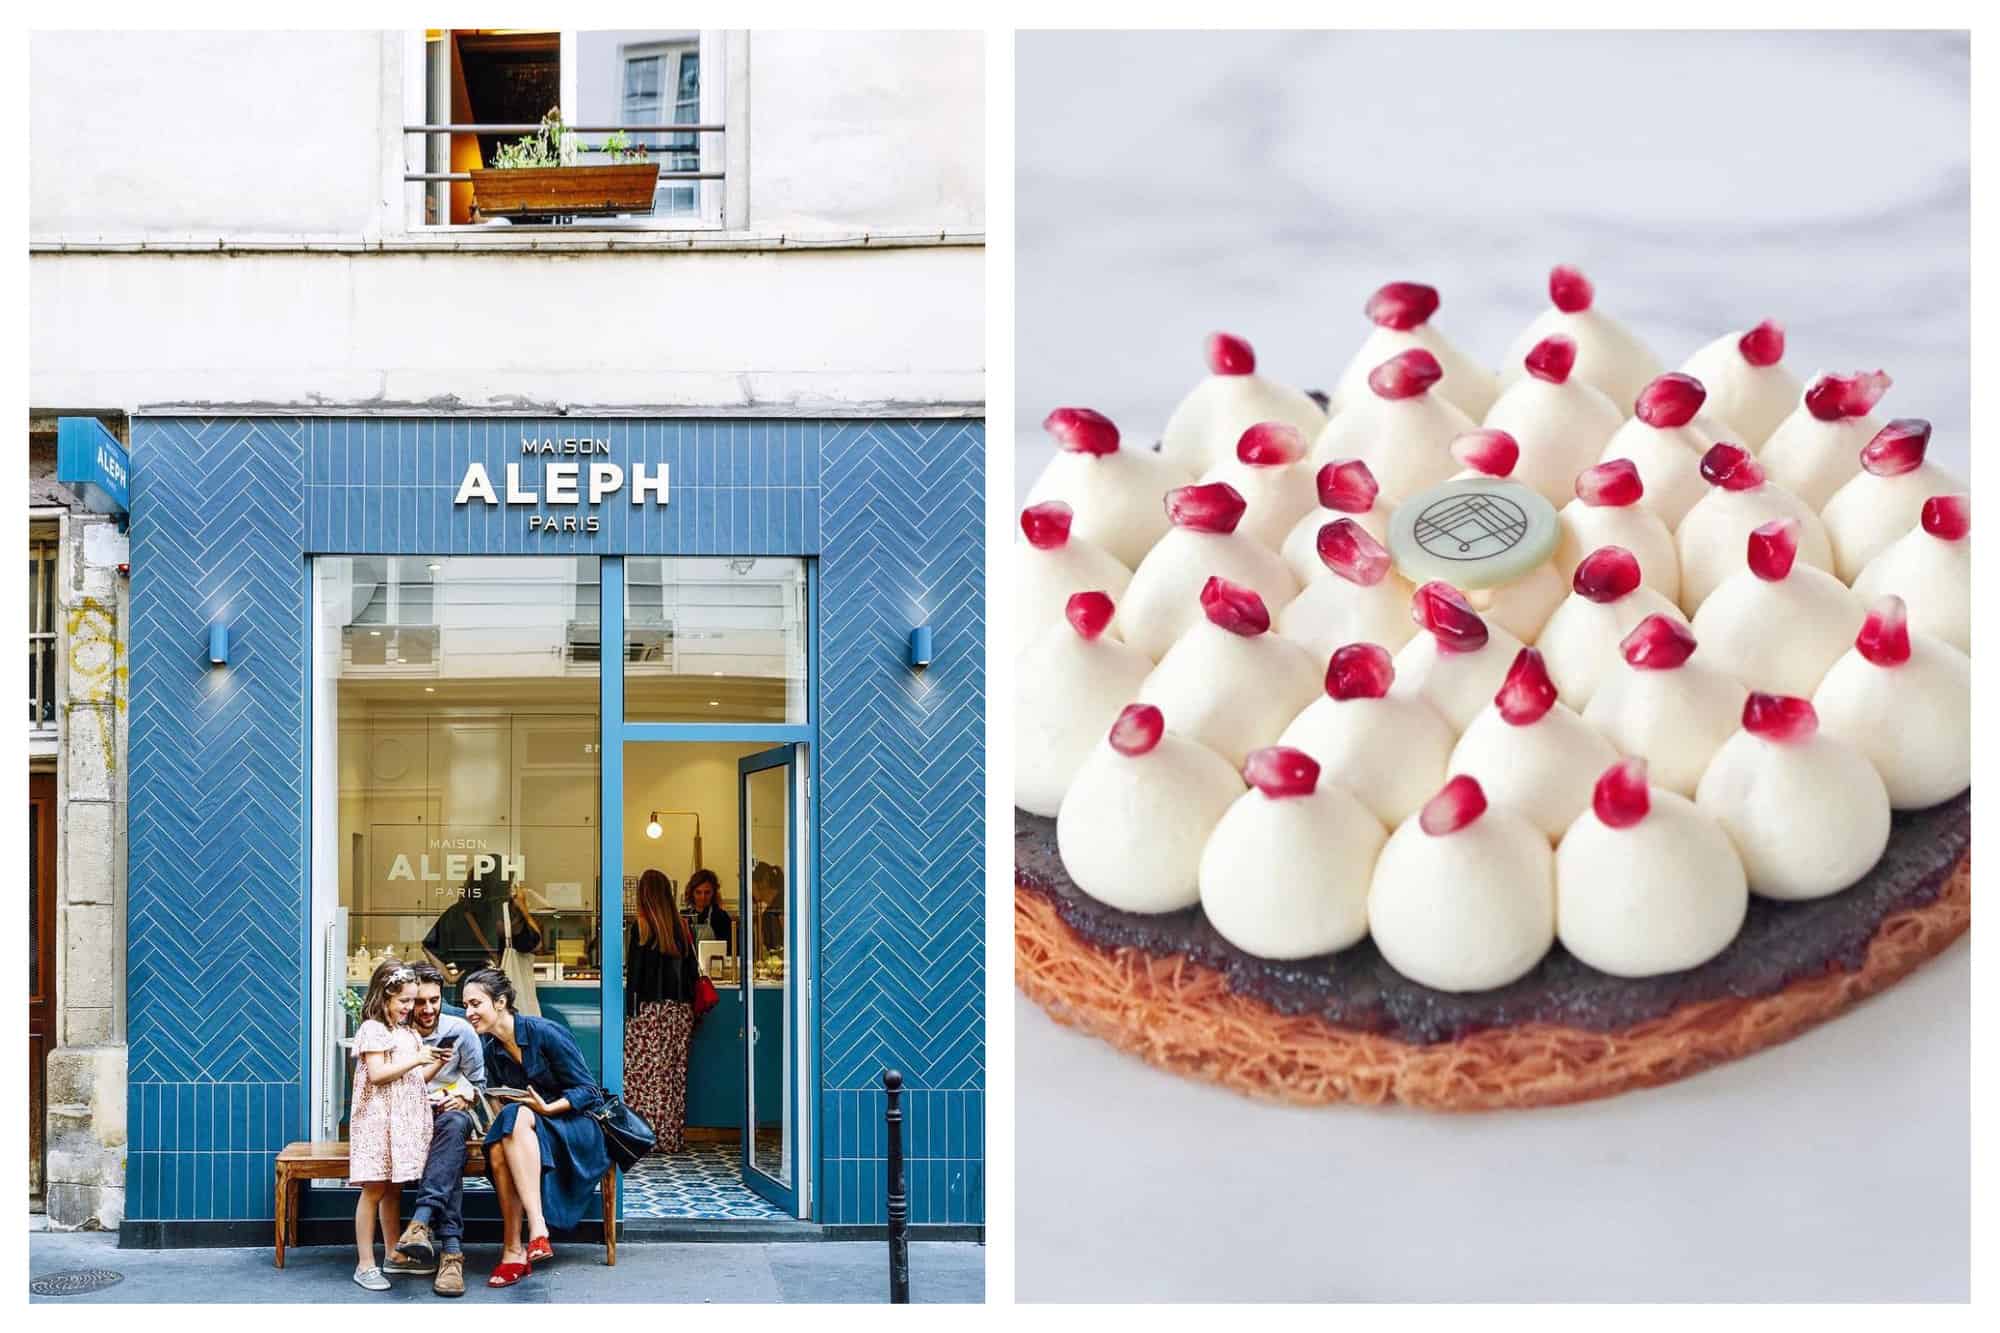 A montage of 2 pictures from Parisian Patisserie Maison Aleph. Left: A family of 3 (a mom, a dad, and a young daughter) sits in front of the pastry shop looking at a cellphone. Maison Aleph’s exterior and interior of bright blue tiles can be seen as 2 more people orders inside.
Right: Maison Aleph’s iconic Tarte Grenade & Fleur d’Oranger is pictured here — it is a cake of brown crust, dark jam, and white drops of meringue topped with small slices of cherries.